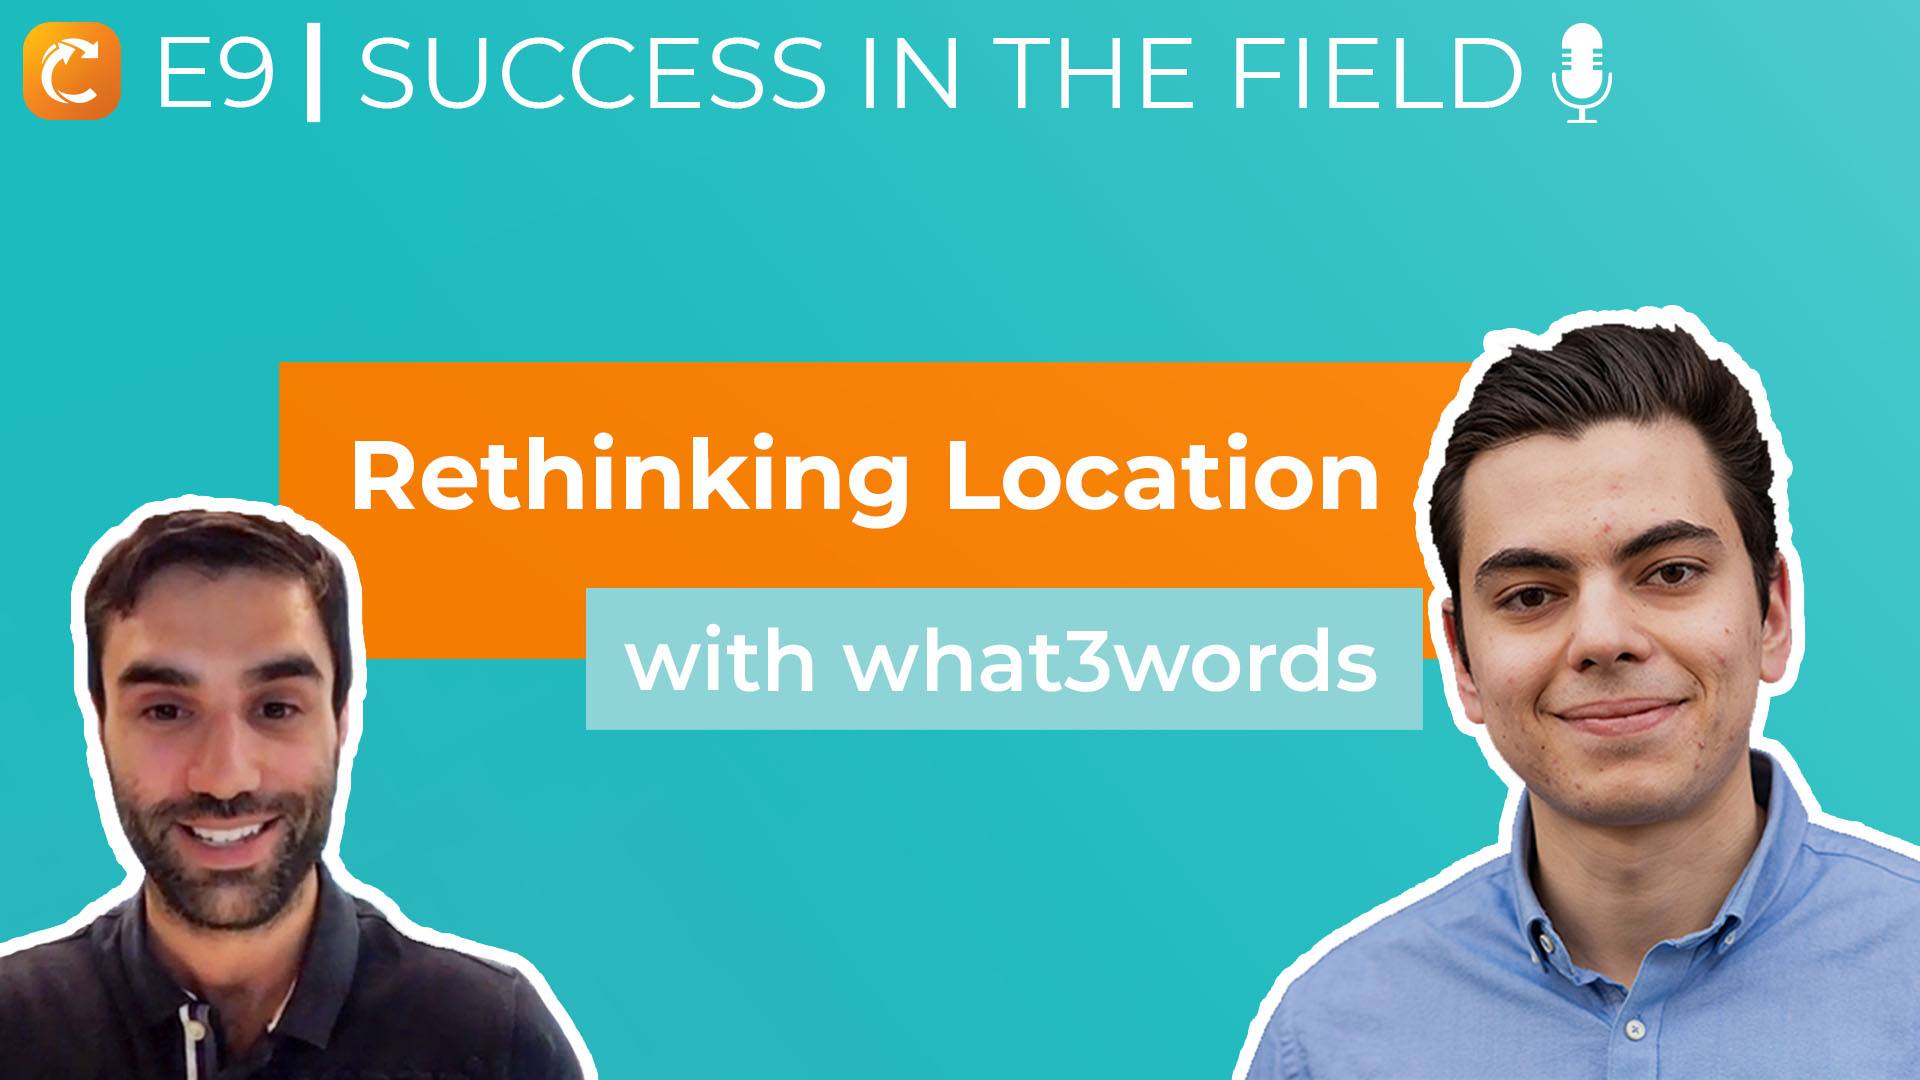 Ep. 9 | Innovation in Location & Easy Addresses with what3words